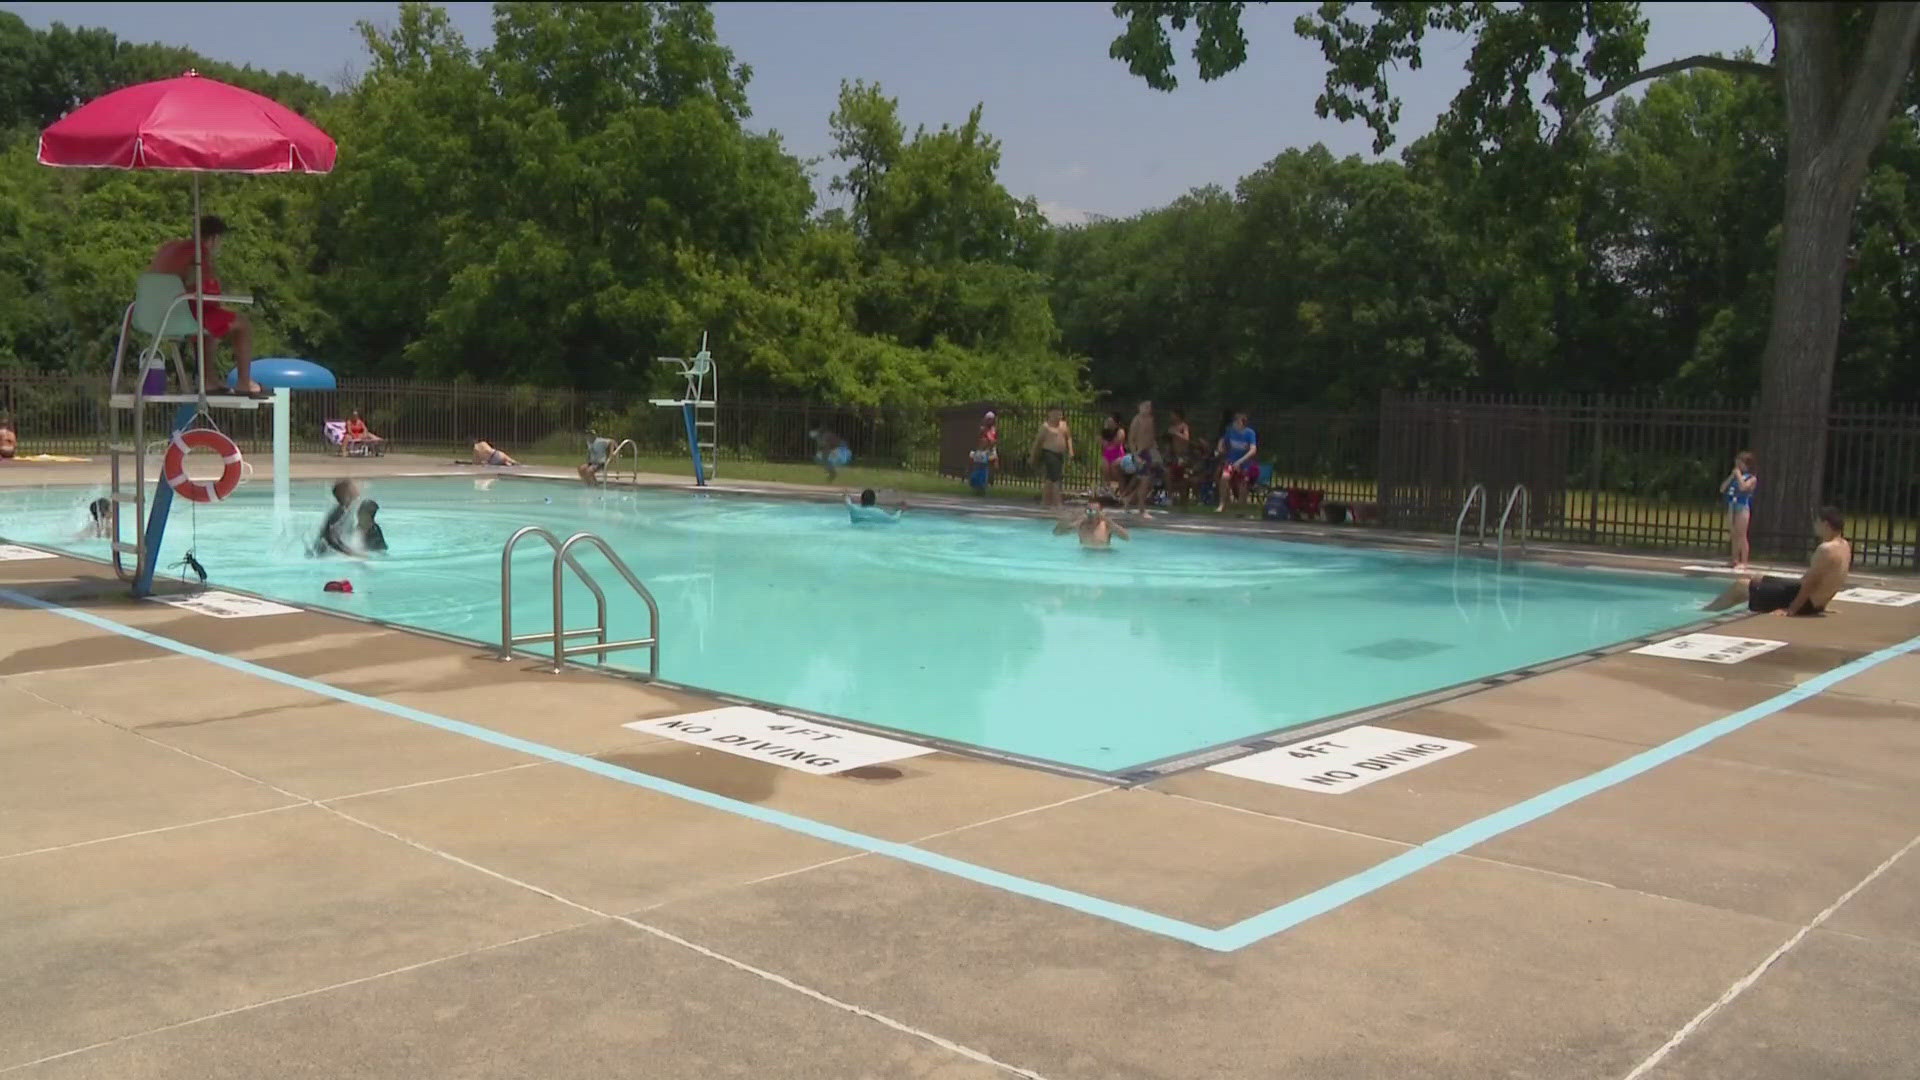 The city said the Roosevelt, Pickford and Navarre pools are currently closed.